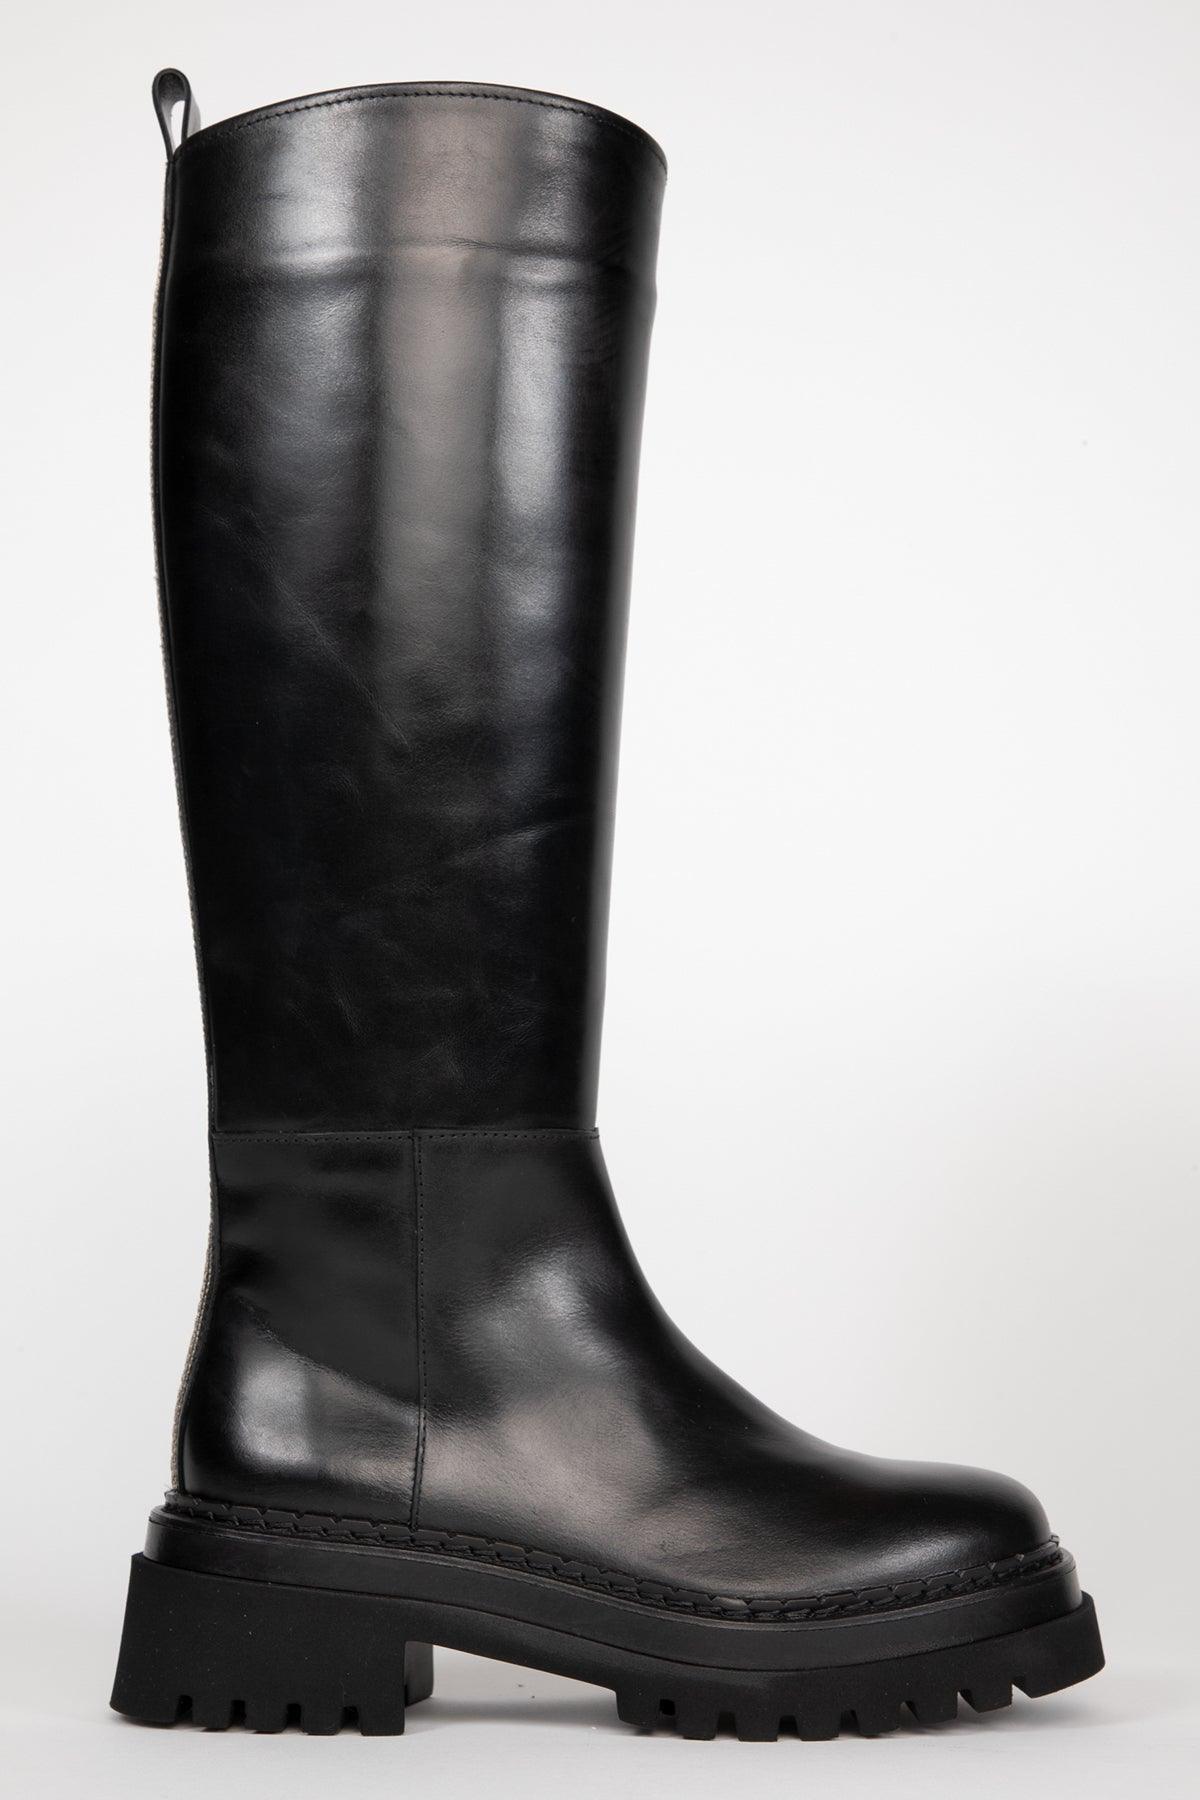 Golva Tall Boots by Homers - Haven